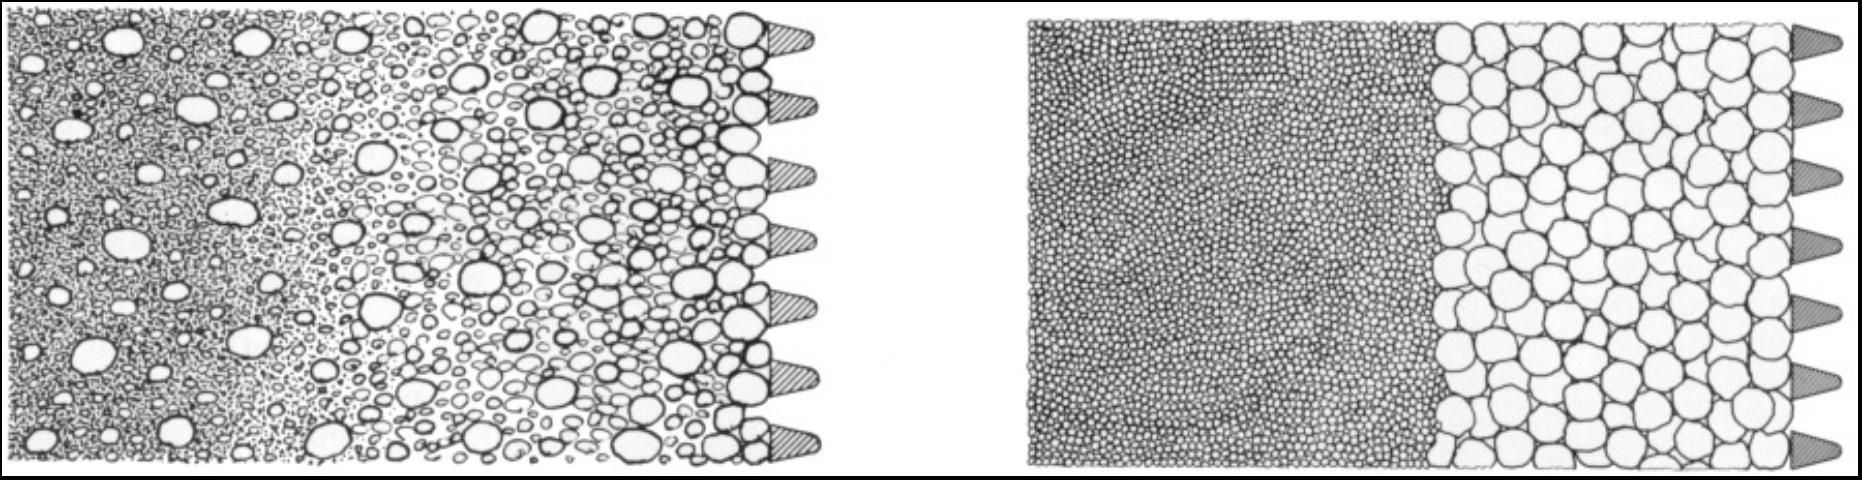 Figure 3. Differences in gravel pack for naturally developed well (left) and artificial gravel pack (right).